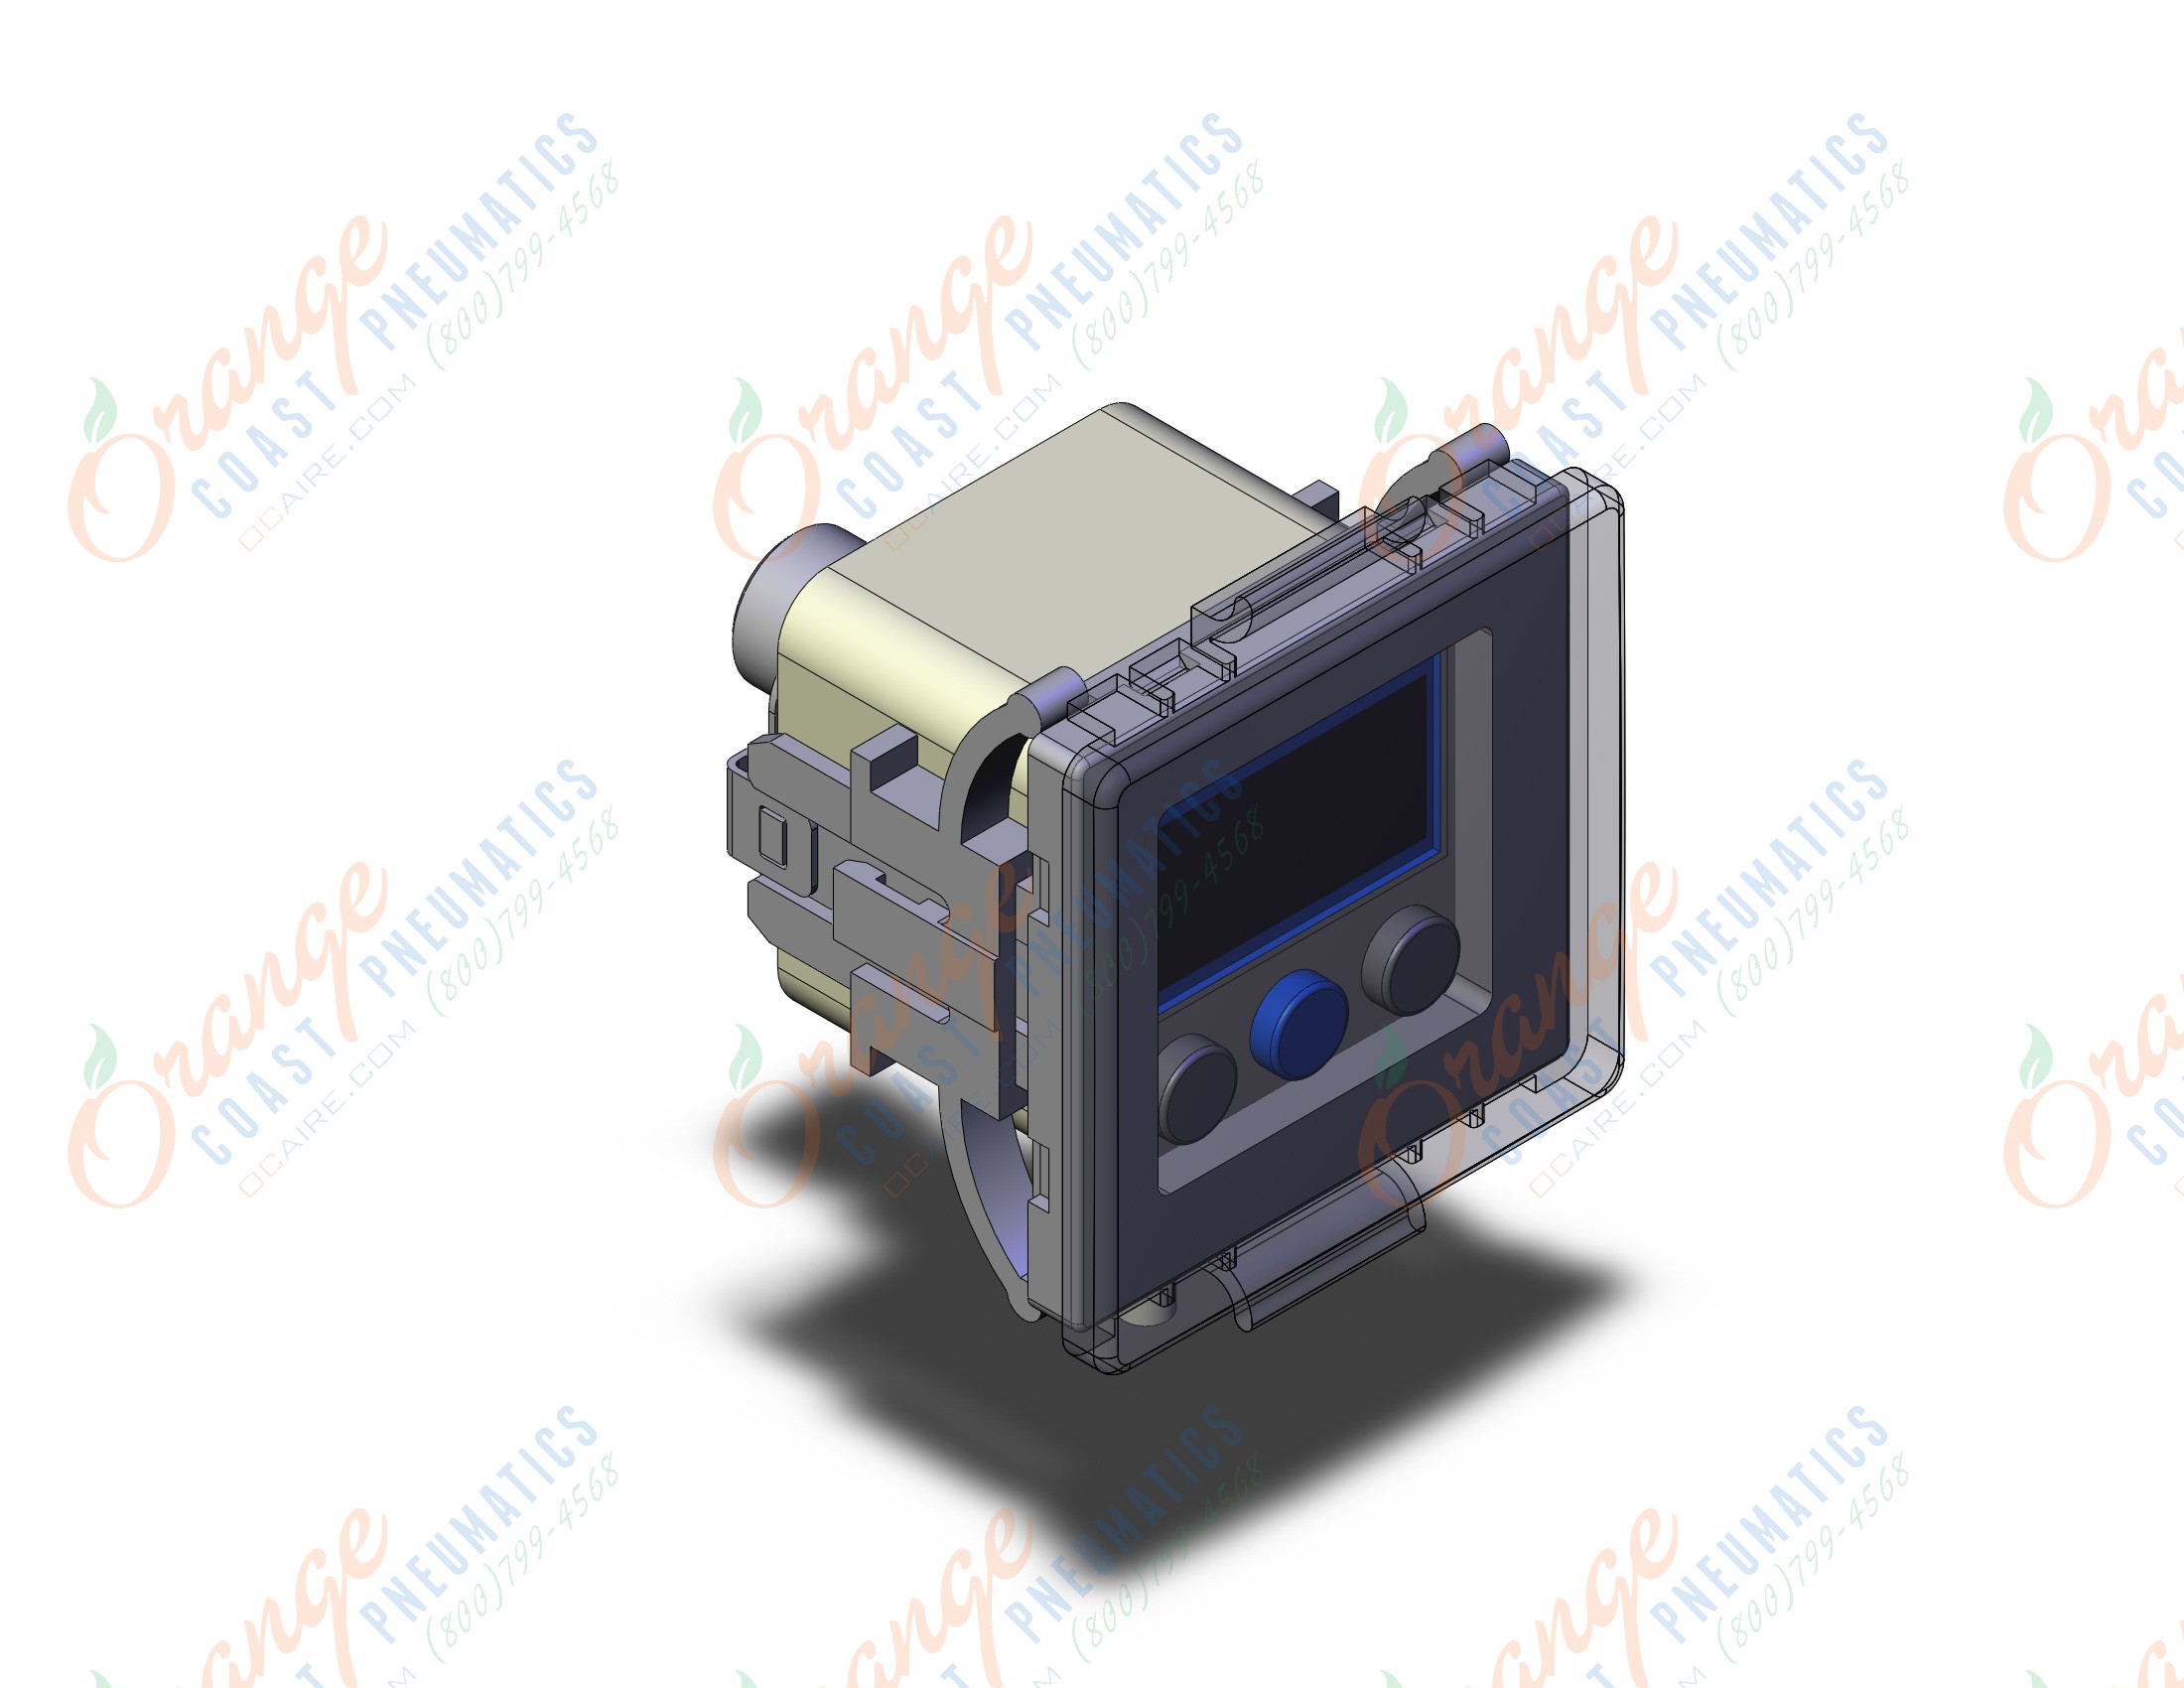 SMC ISE40A-N01-X-PF ise40/50/60 1/8" npt version, ISE40/50/60 PRESSURE SWITCH